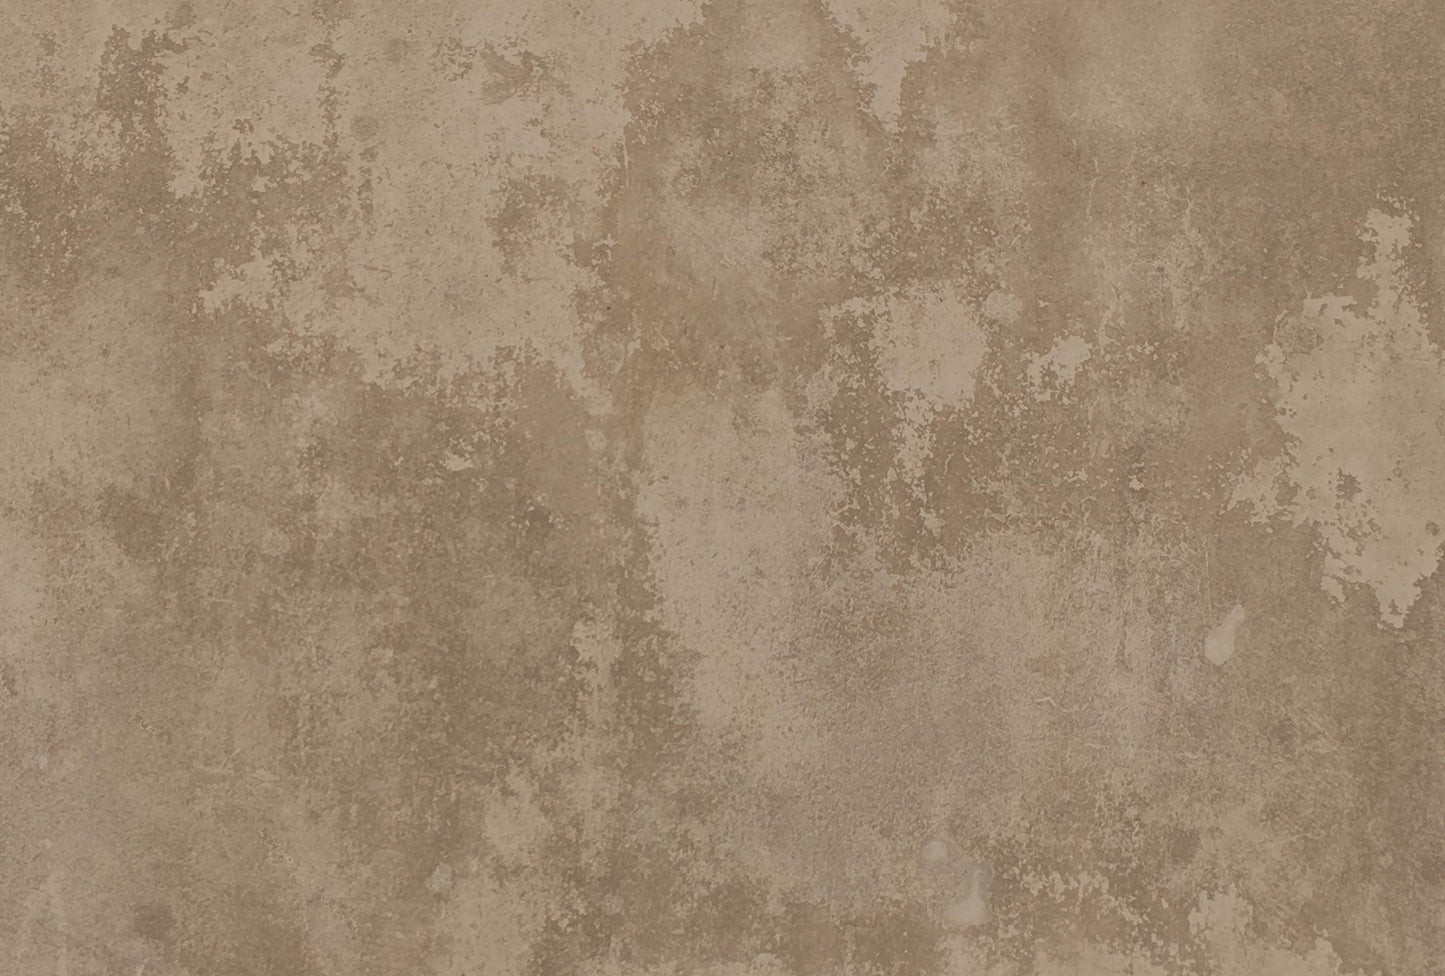 Baked Taupe Photography Backdrop - Bubb Market